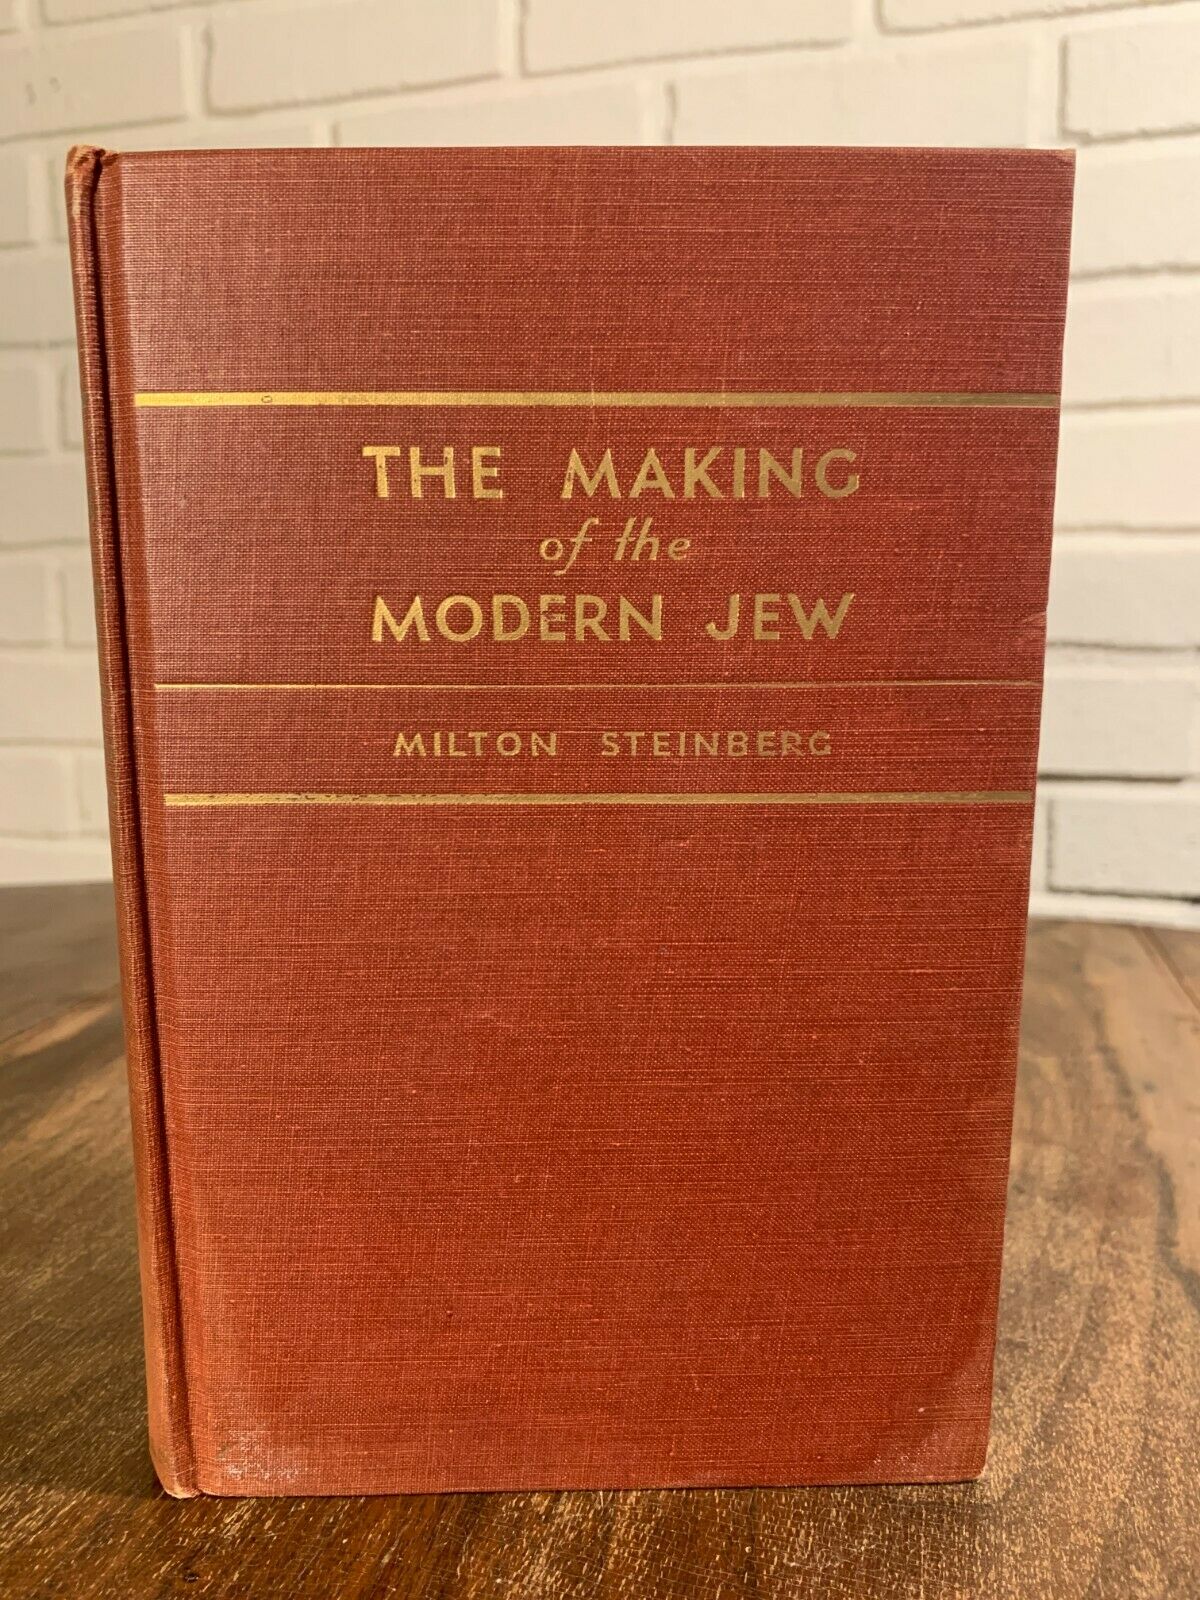 The Making of the Modern Jew, Milton Steinberg, (1948) Revised Edition (2B)